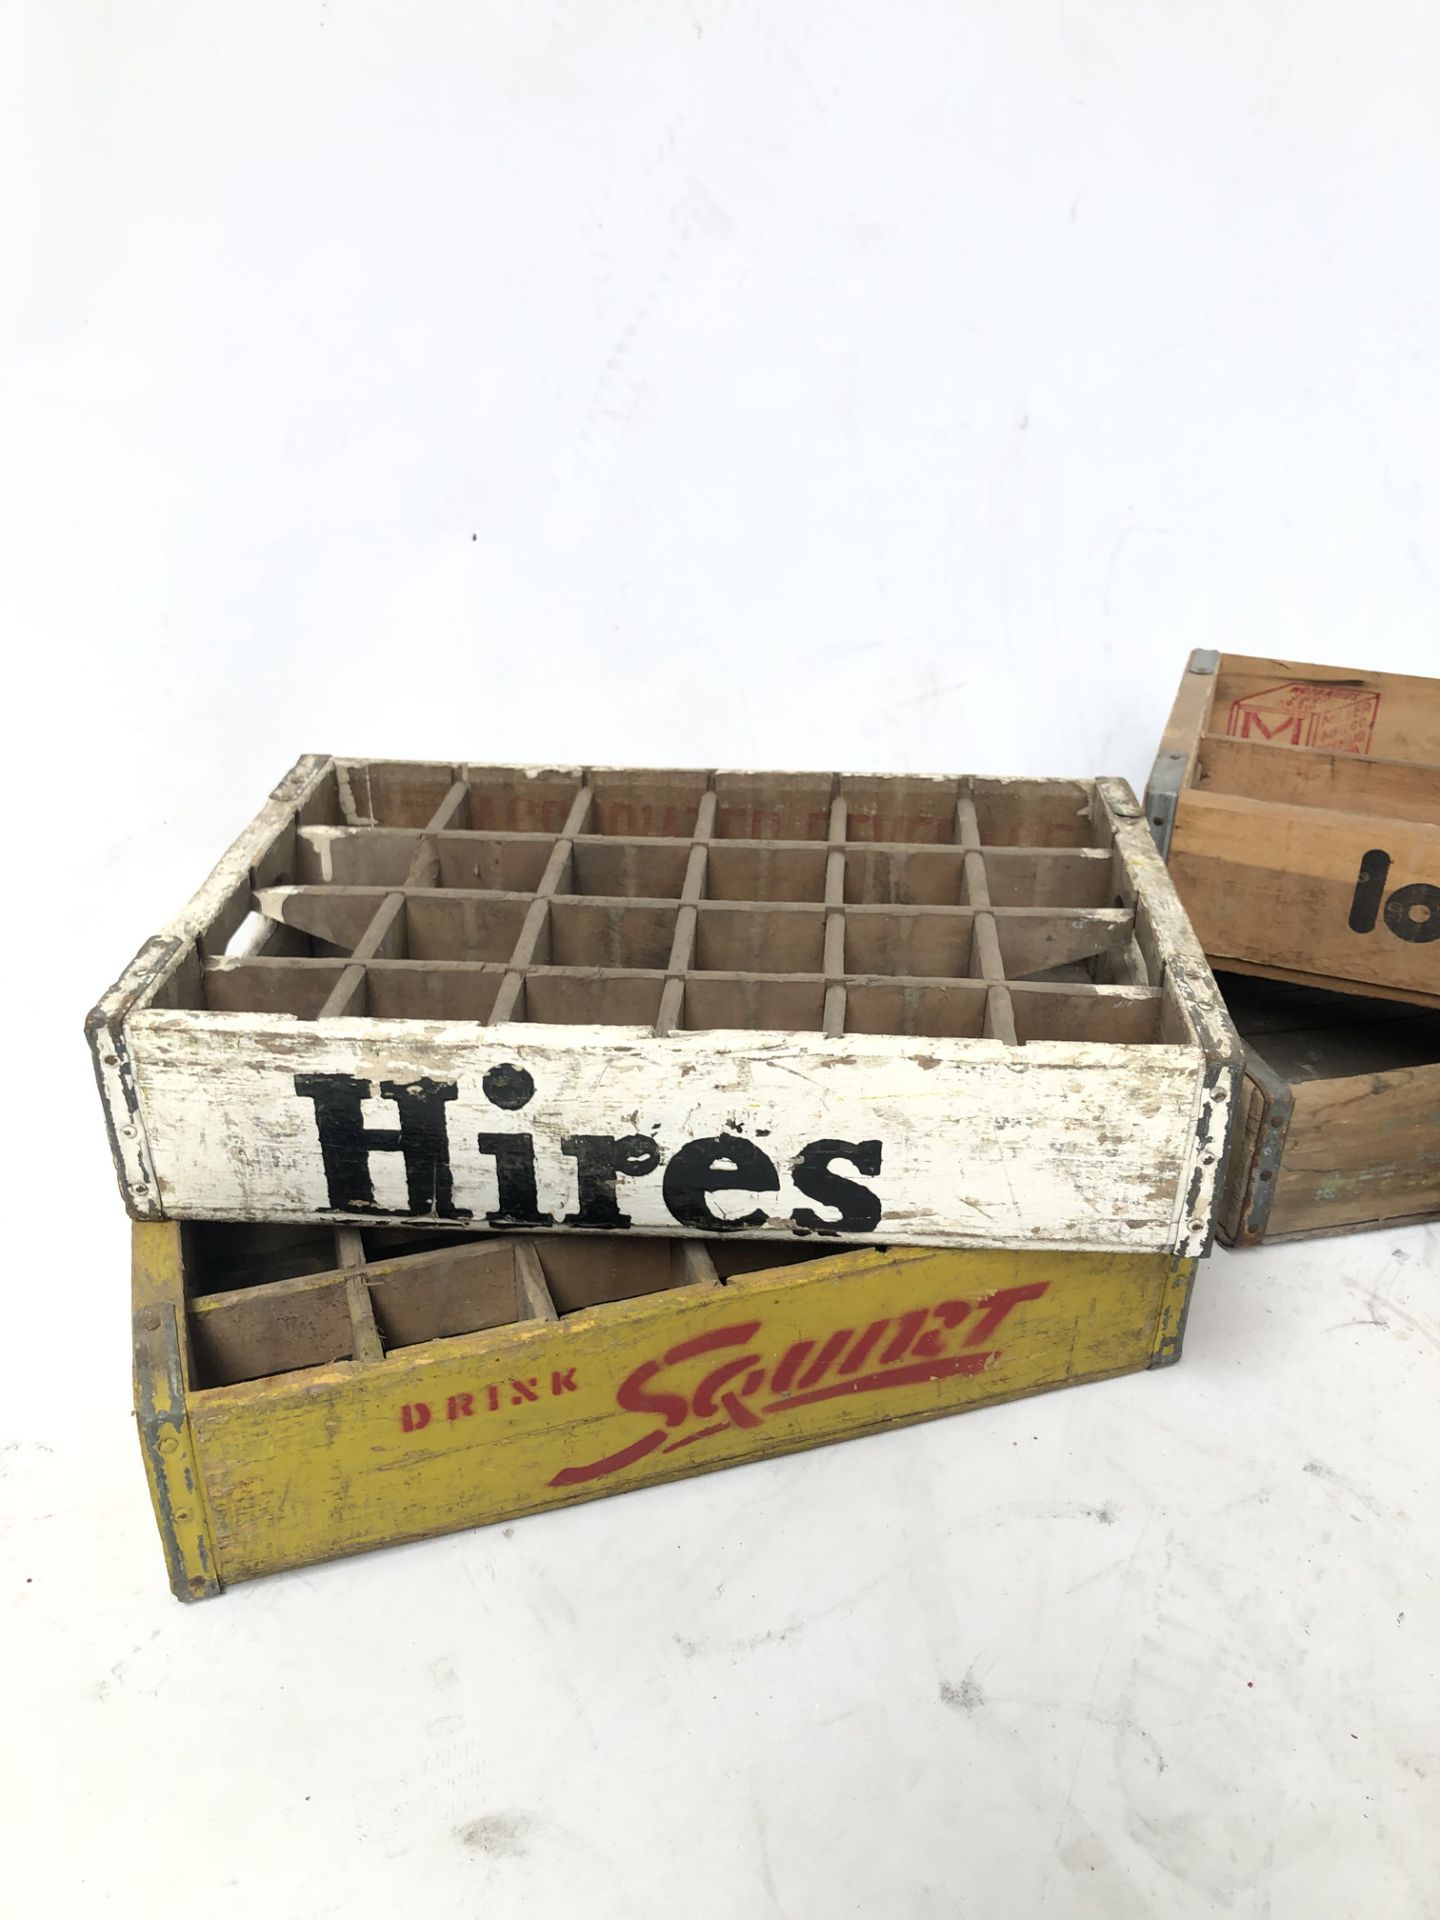 Lot of 6 Different Vintage Wooden Soda Crates - Image 4 of 4